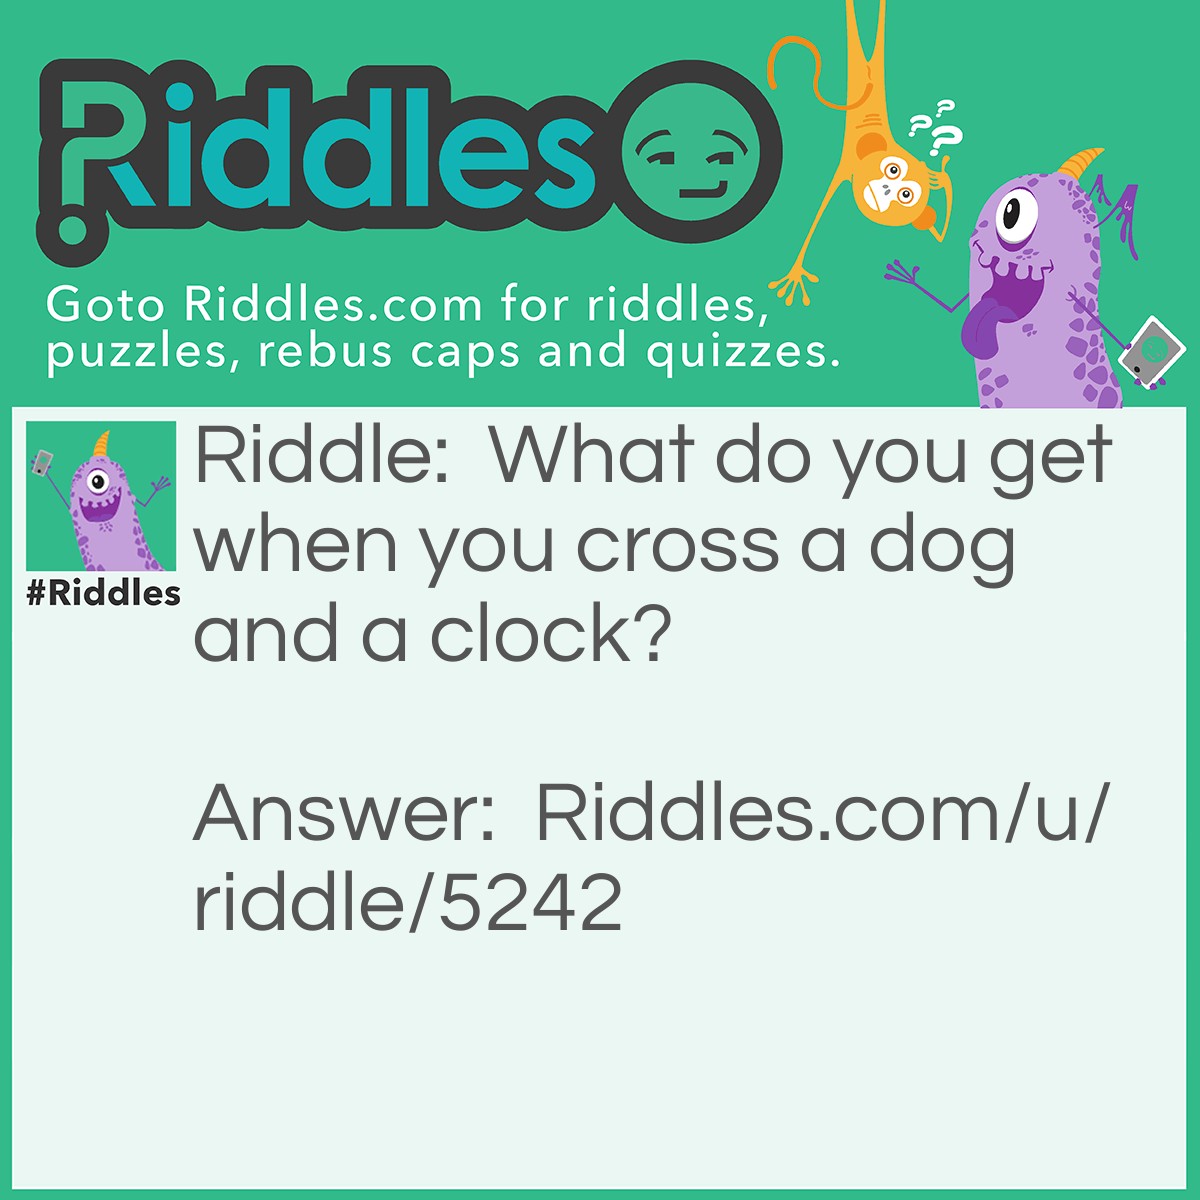 Riddle: What do you get when you cross a dog and a clock? Answer: Lots and lots of tics!